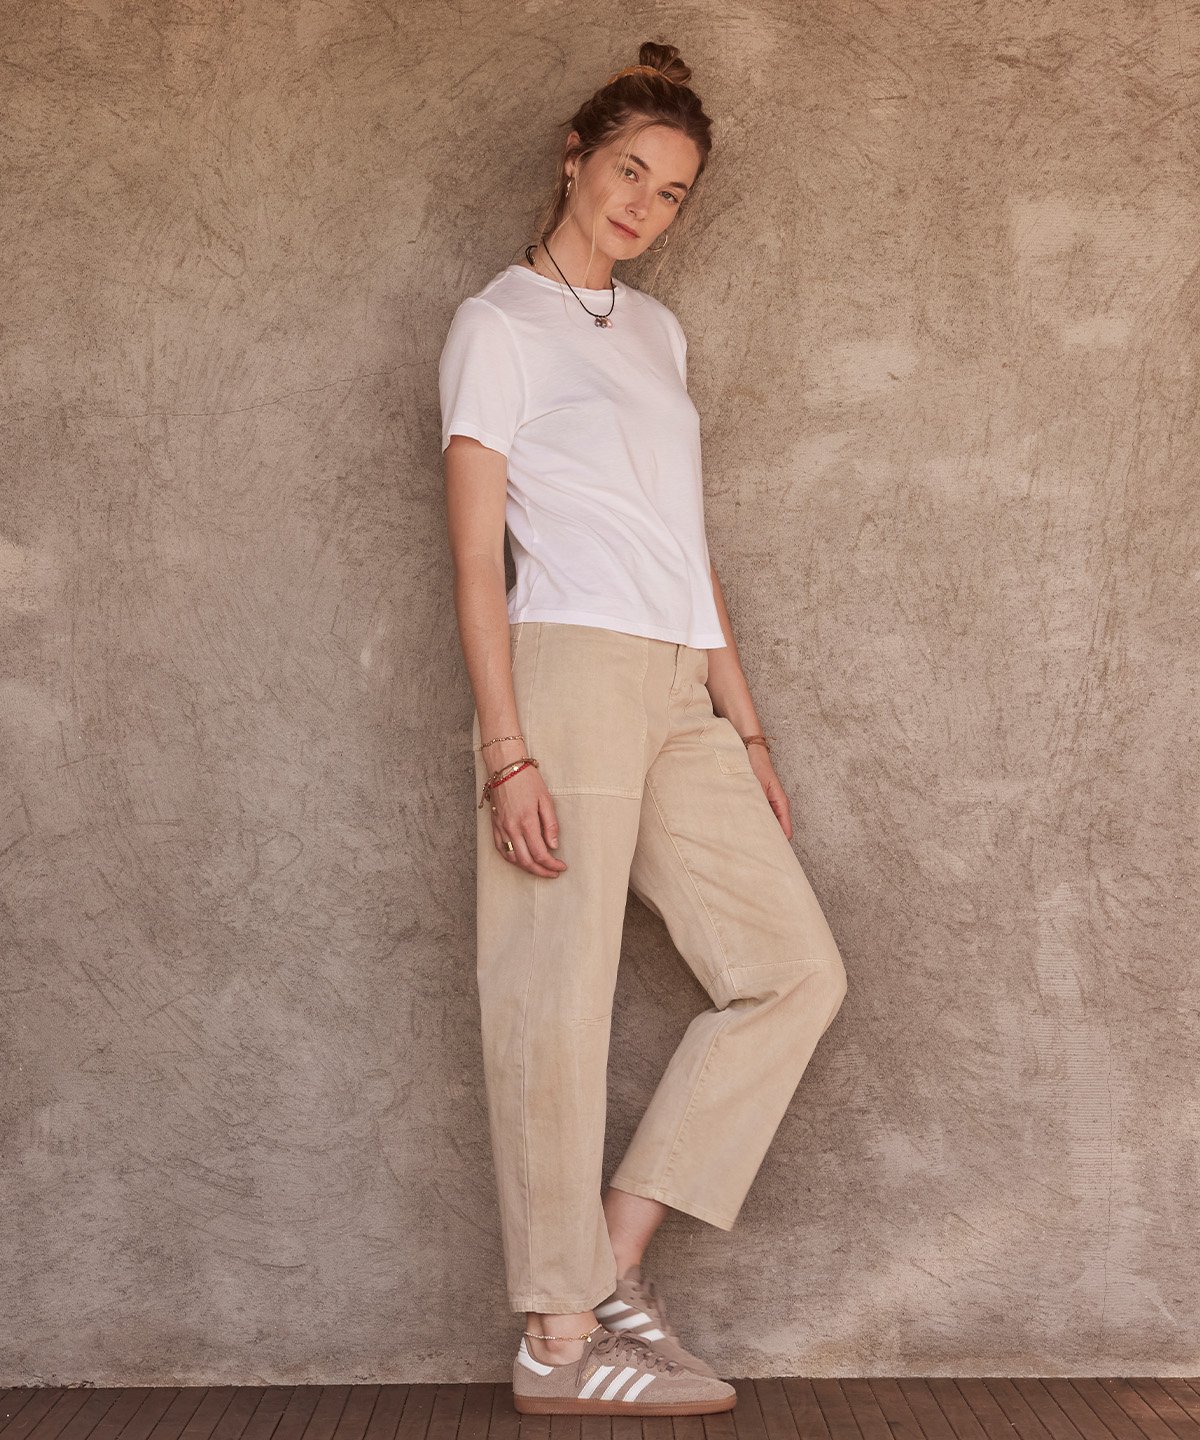 Model wearing the Brylie Sanded Twill Utility Pant